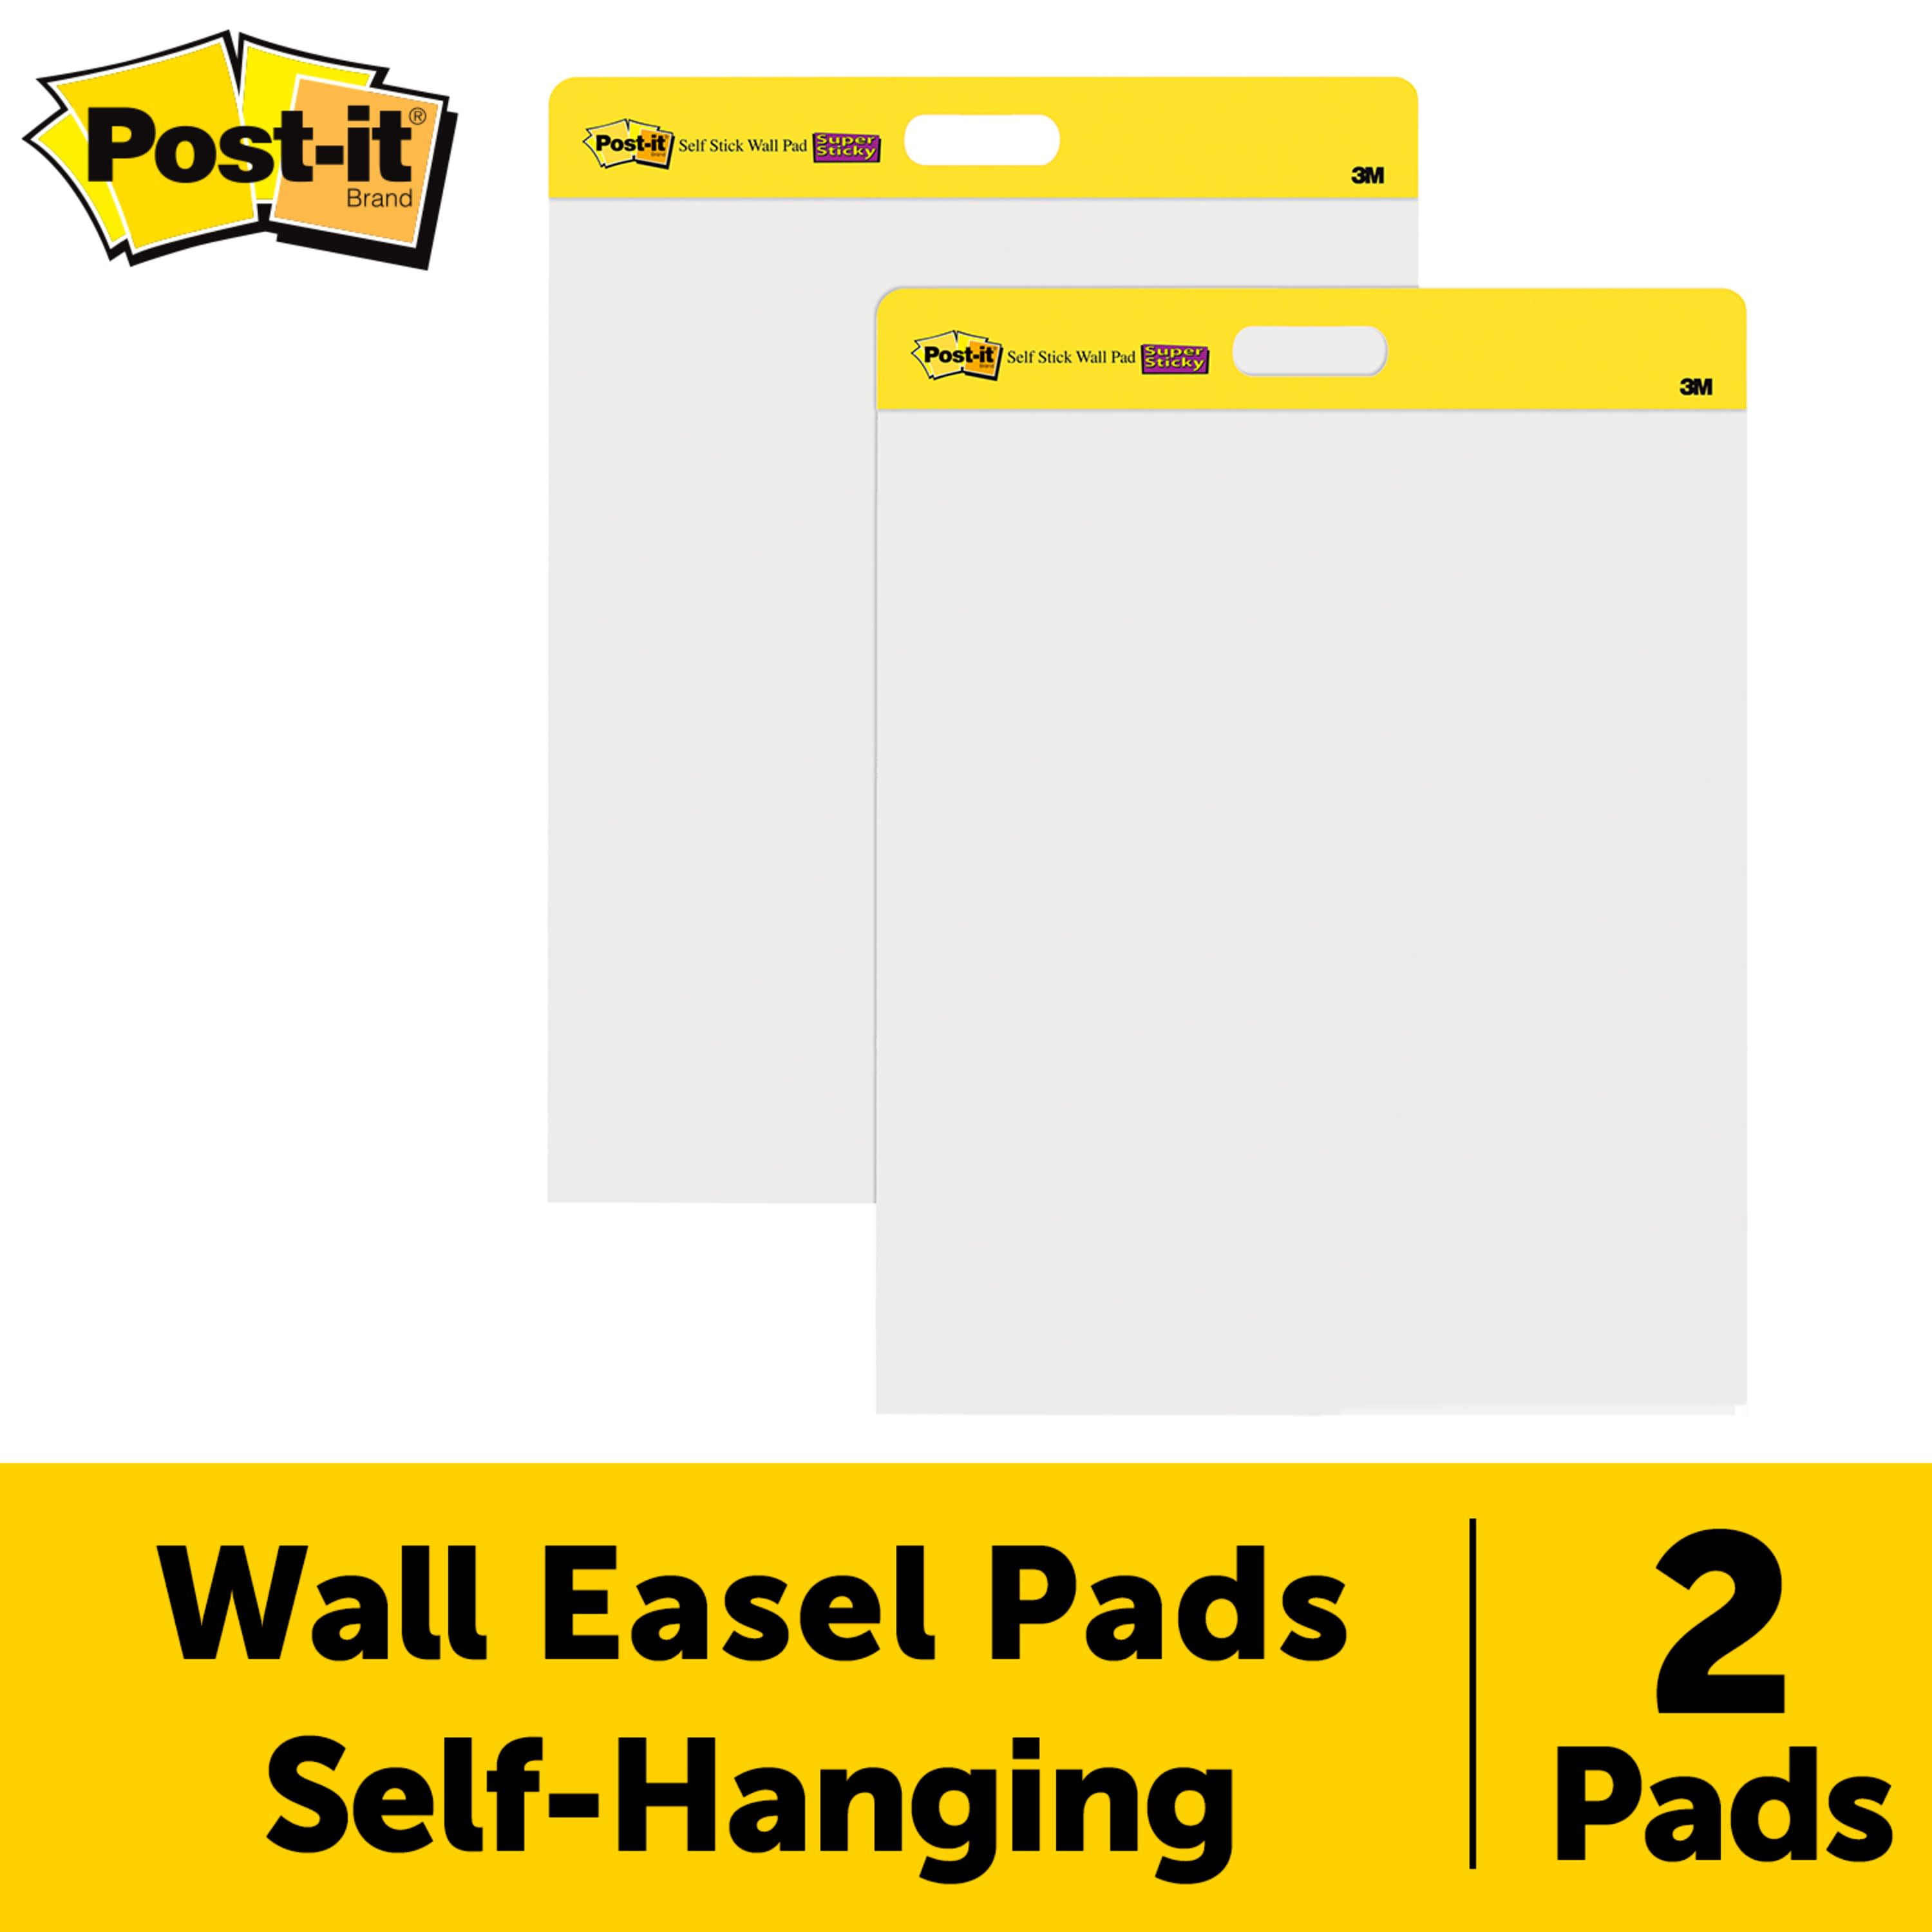 Post-it Super StickyWall Pad, 20 in x 23 in, White, 20 Sheets/Pad, Mounts  to Surfaces with Command Strips Included, 1 Pad/Pack (566SS)